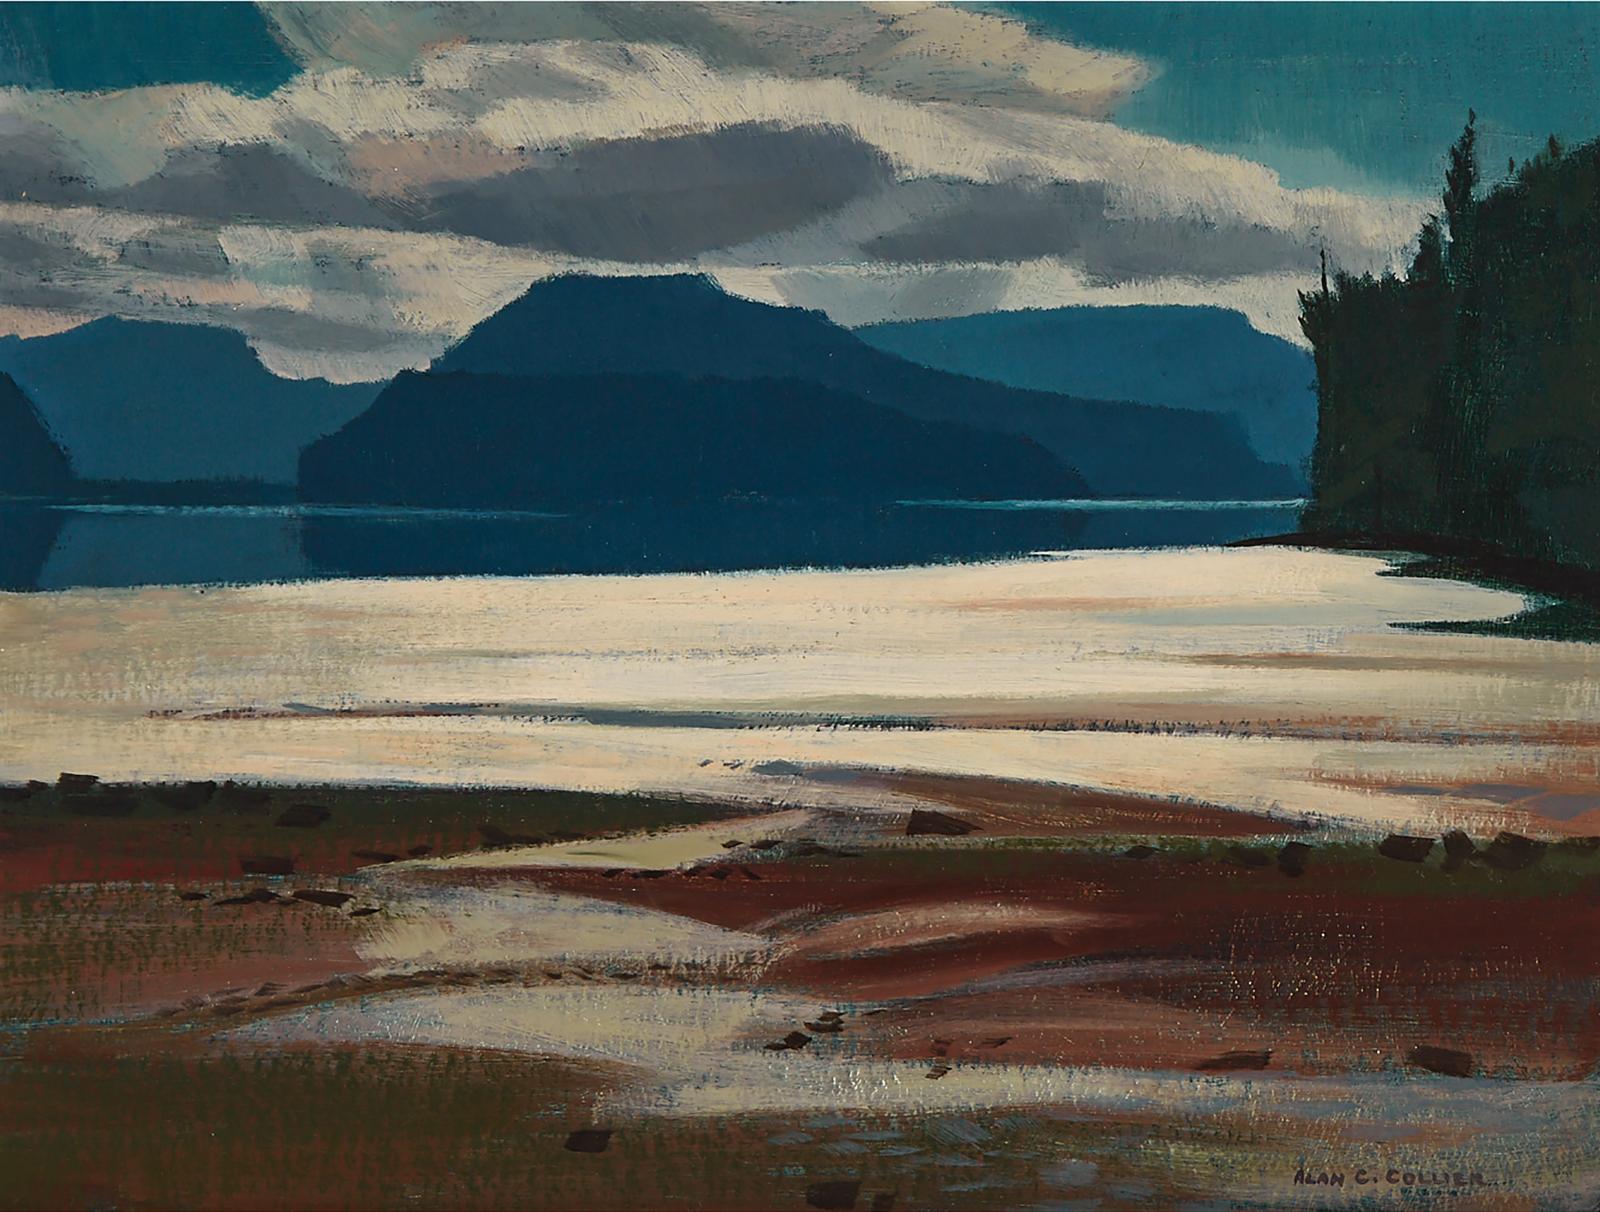 Alan Caswell Collier (1911-1990) - Low Tide, Grise Bay, Vancouver Island